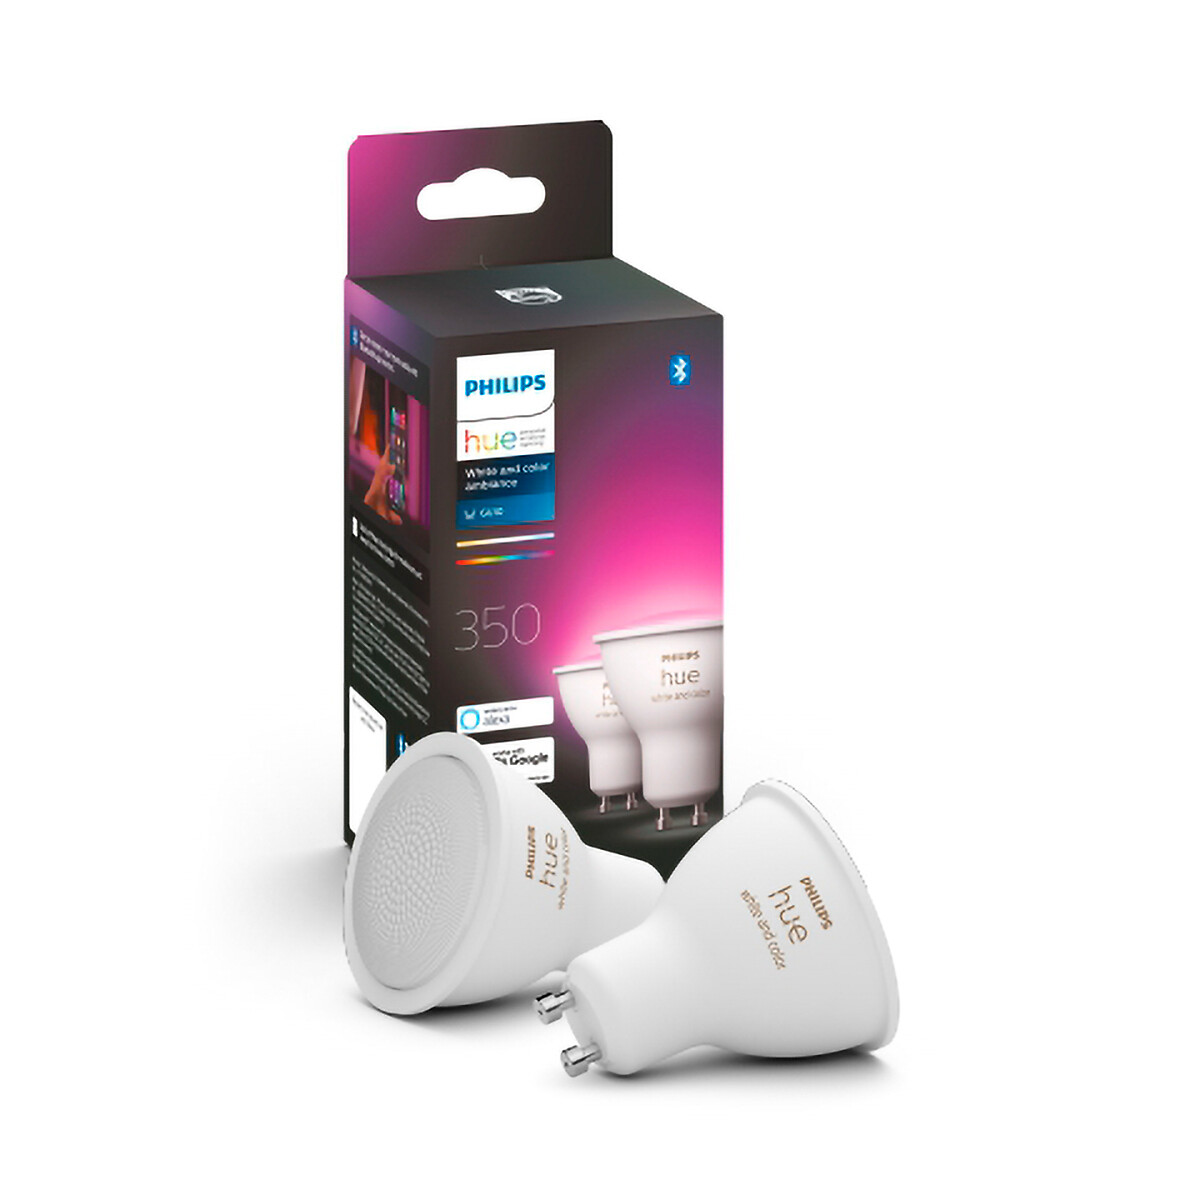 Philips Hue White And Color Ambiance Play Light Bar Double Pack White, Cool  White, Warm White